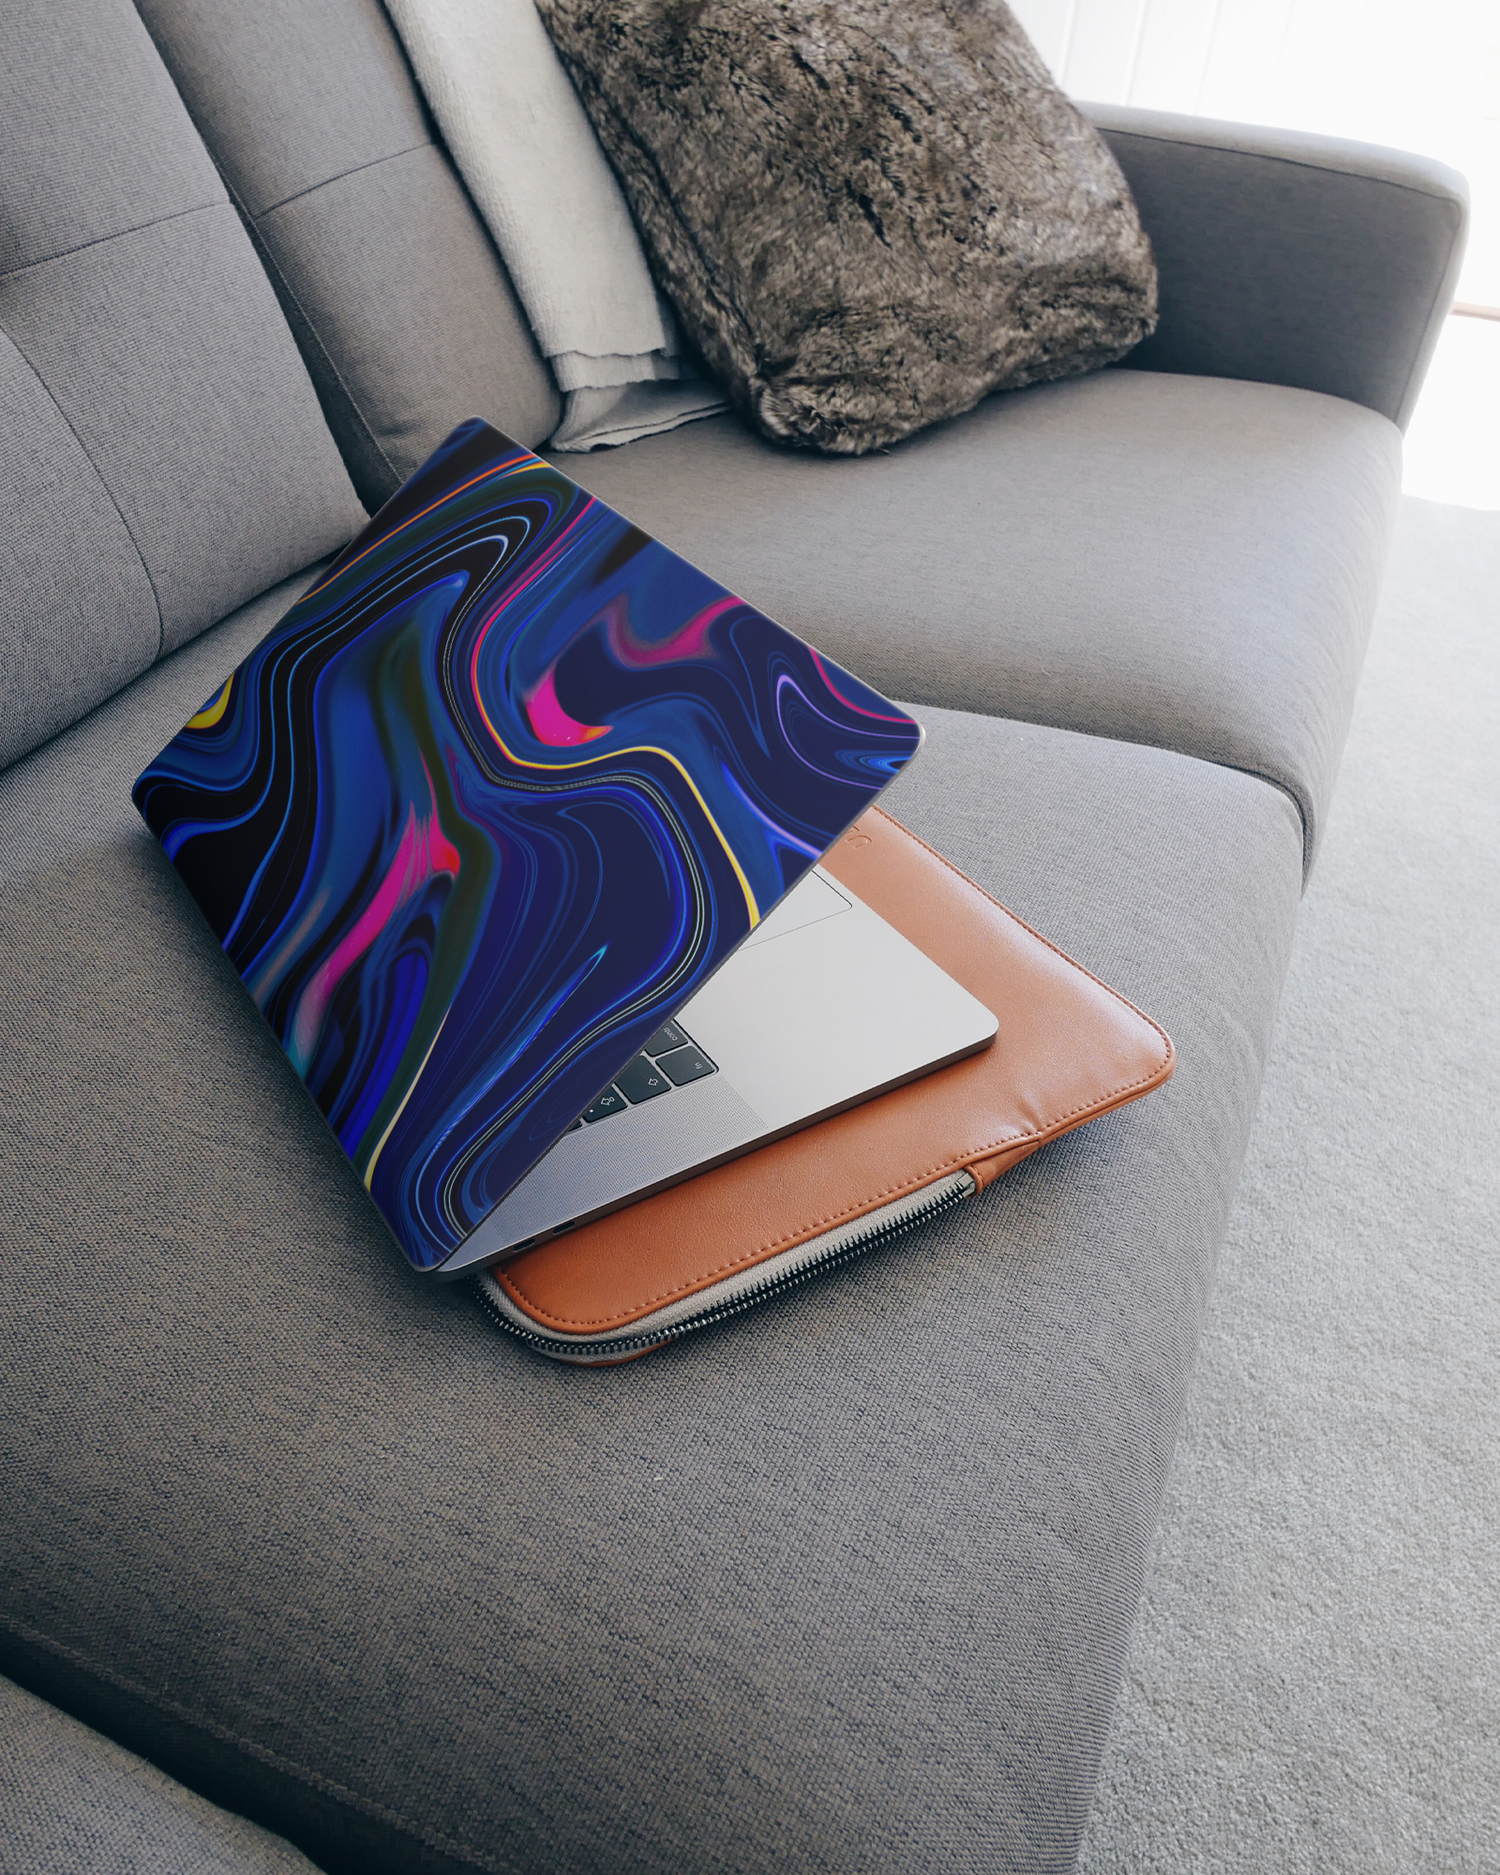 Space Swirl Laptop Skin for 15 inch Apple MacBooks on a couch